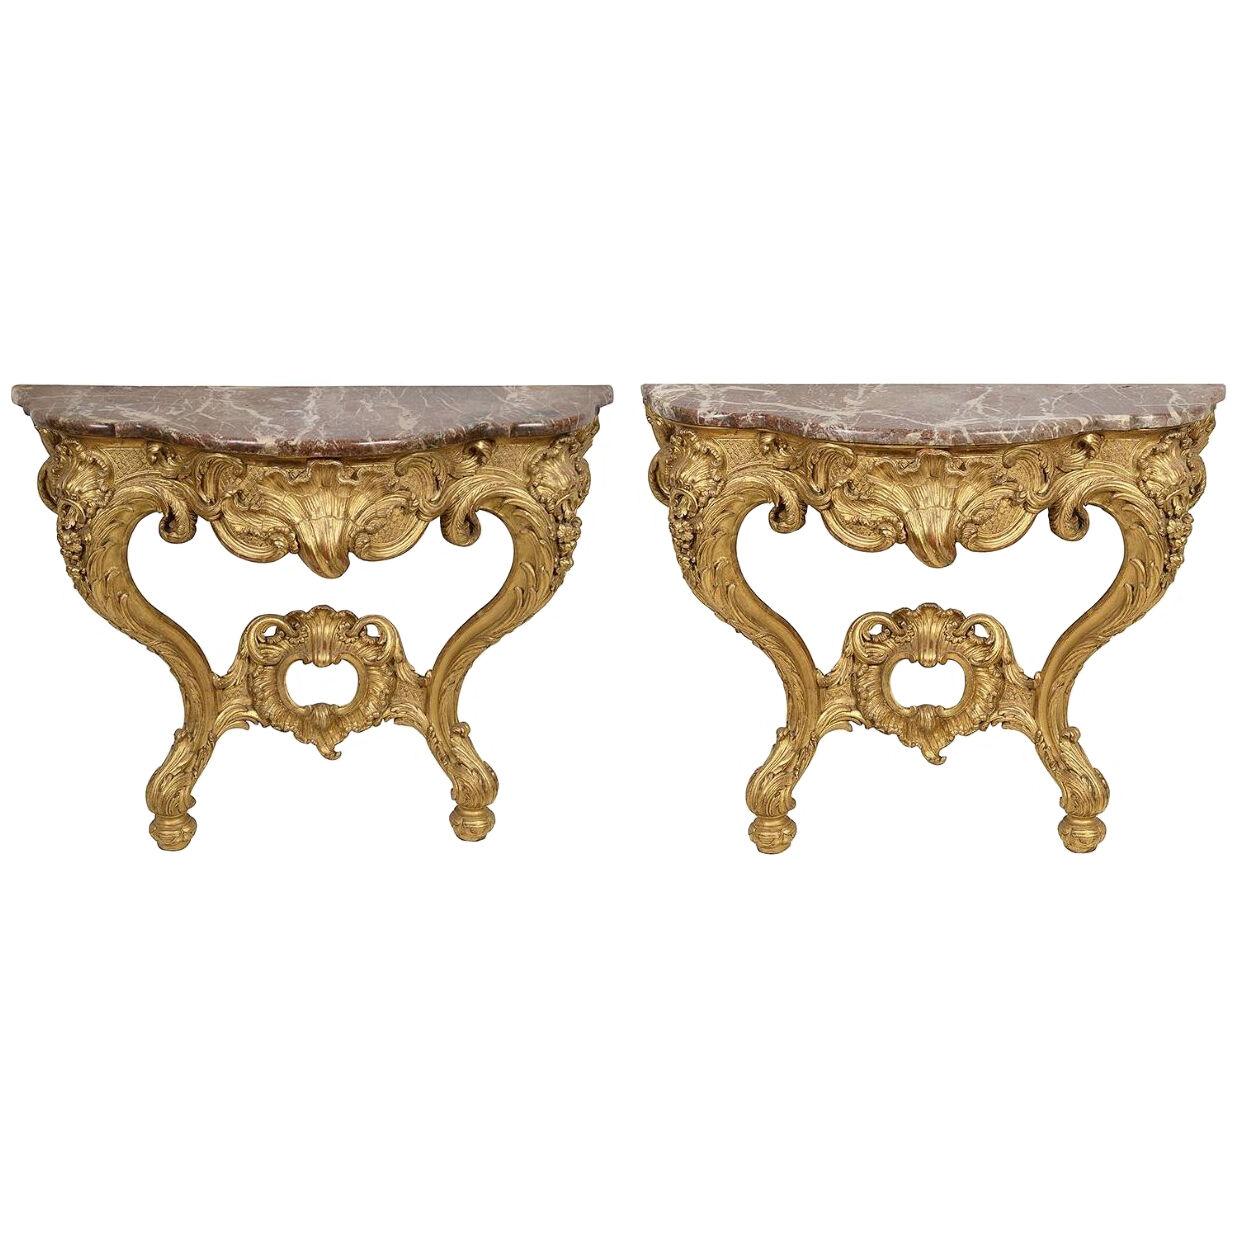 Pair French carved giltwood Console tabels, circa 1840